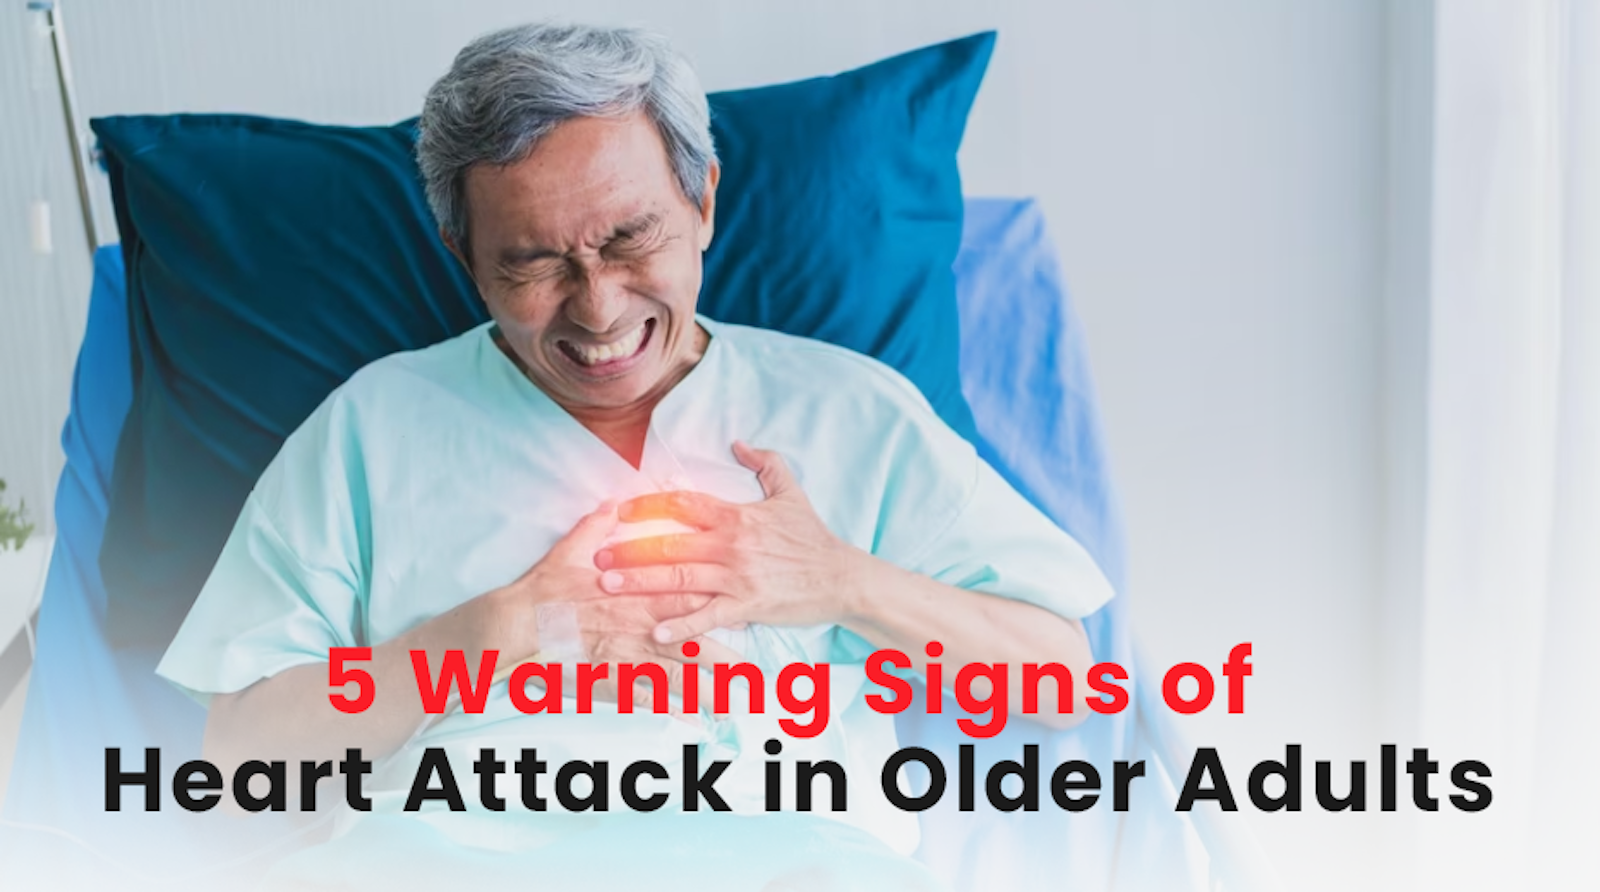 5 Warning Signs of Heart Attack in Older Adults